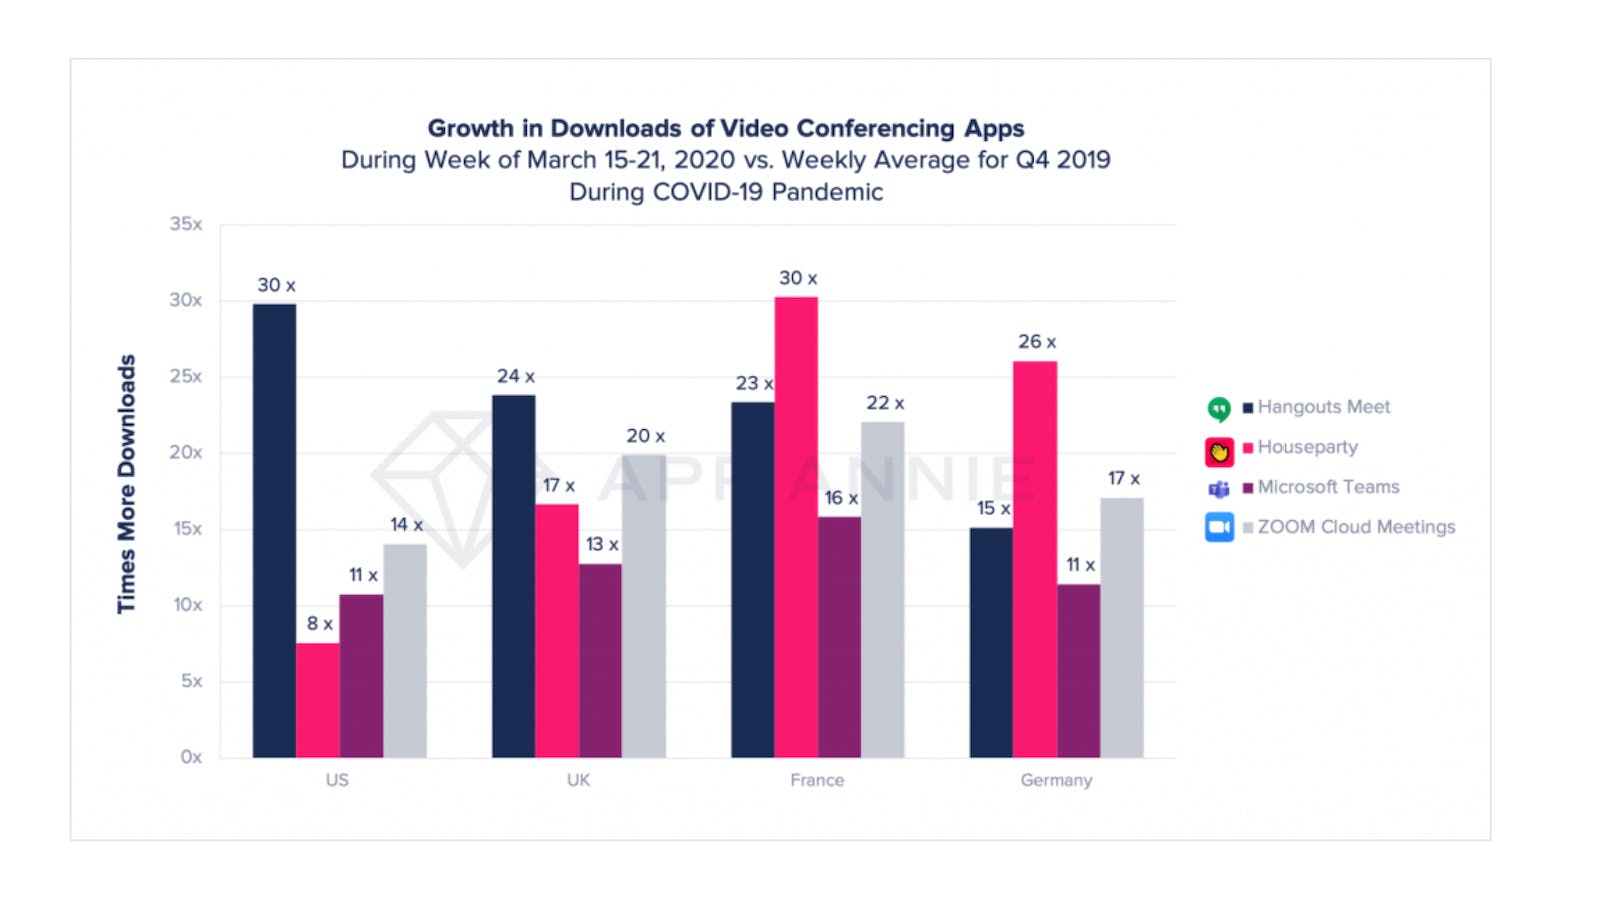 Growth in downloads of video conferencing apps